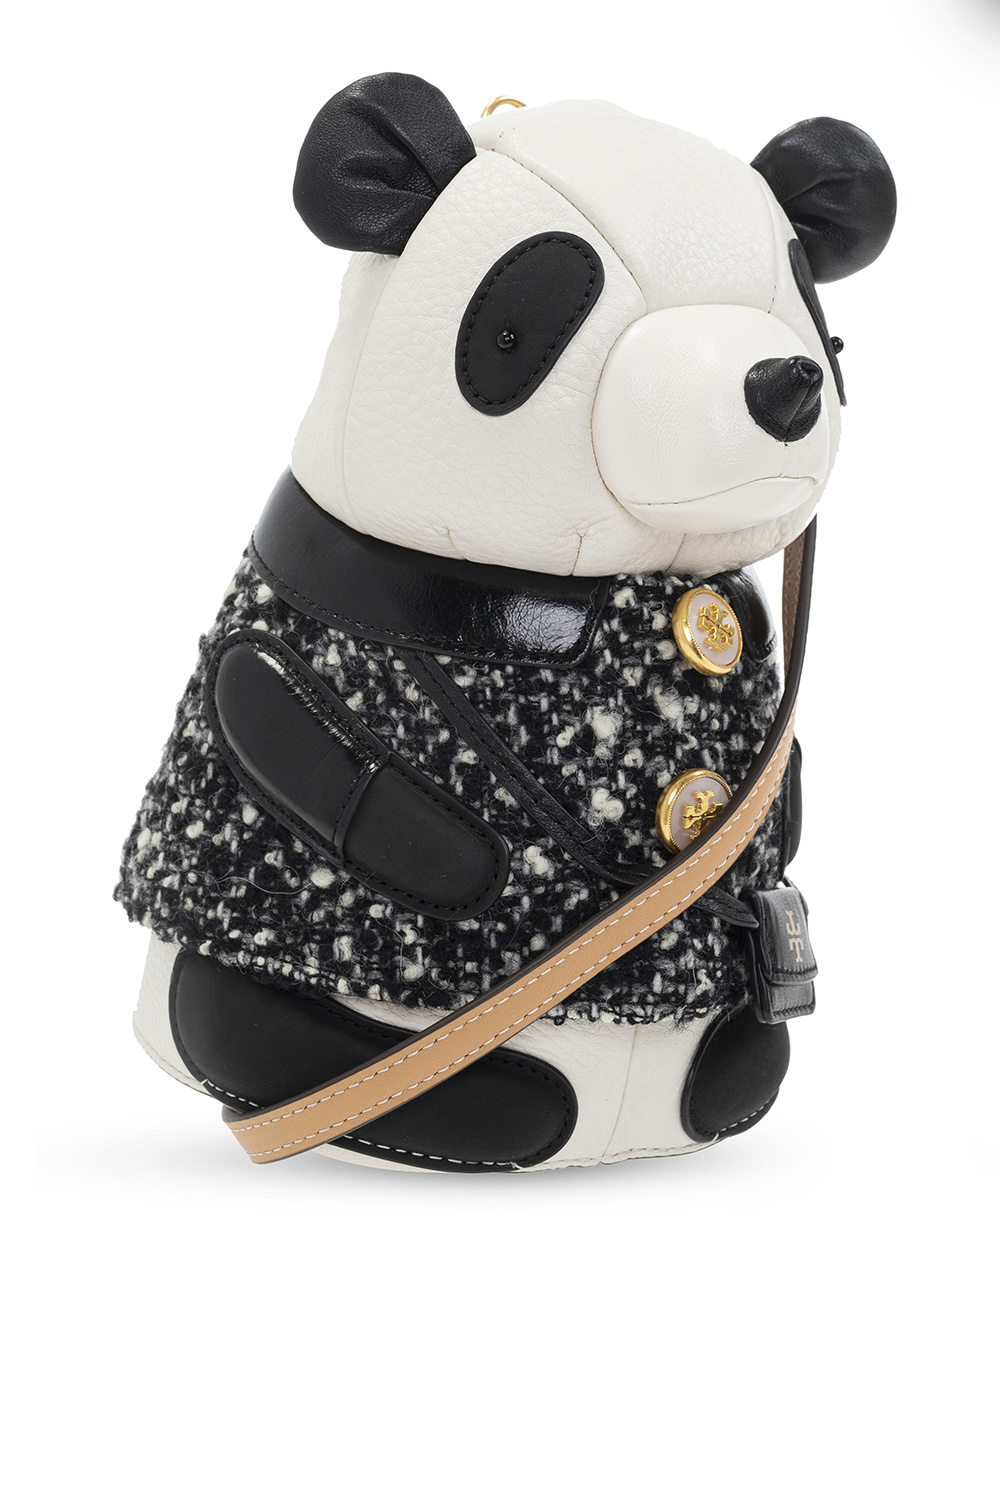 A giant panda made from Louis Vuitton handbags is displayed at